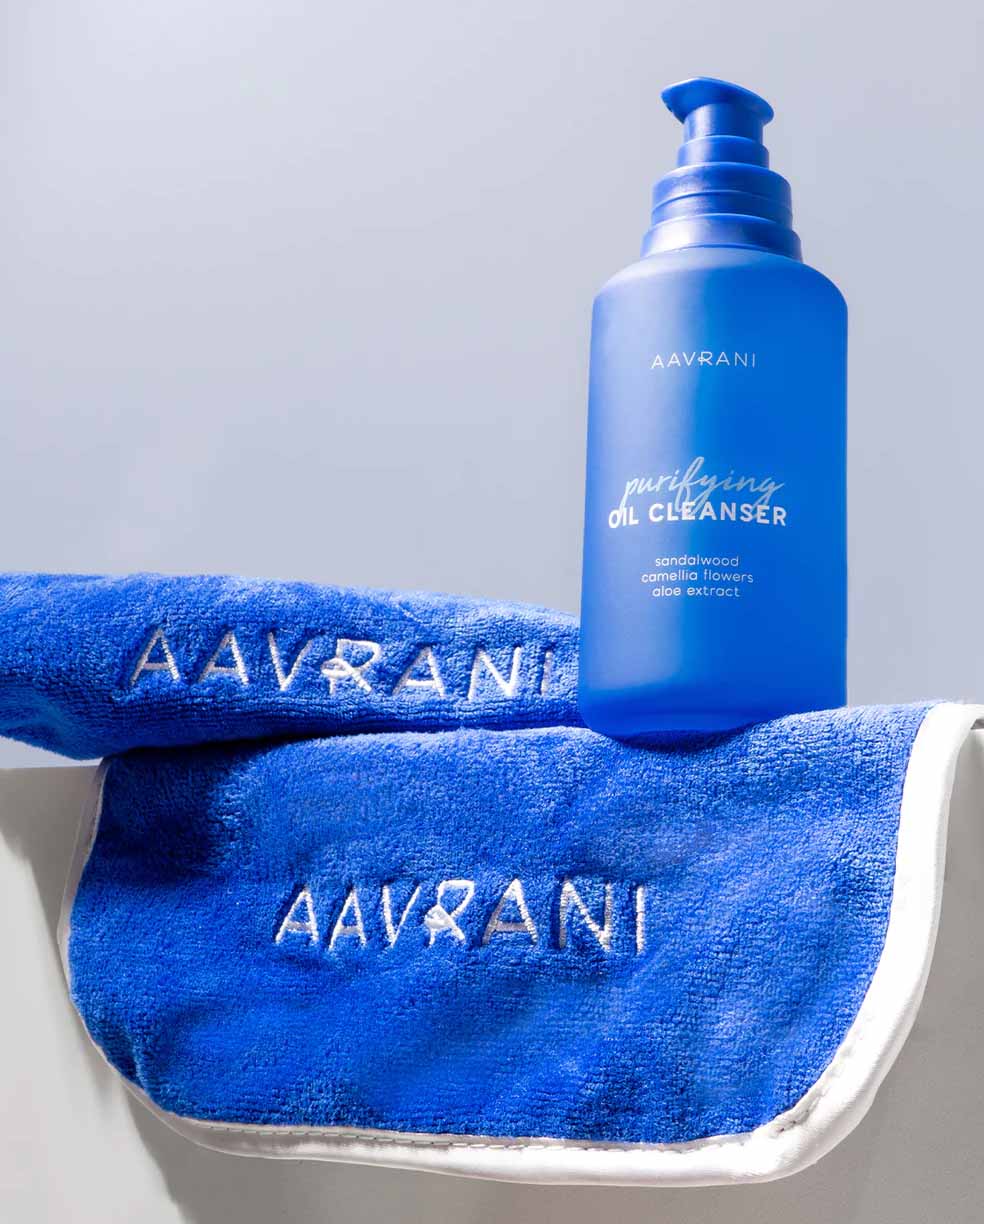 AAVRANI Purifying Oil Cleanser lifestyle shot